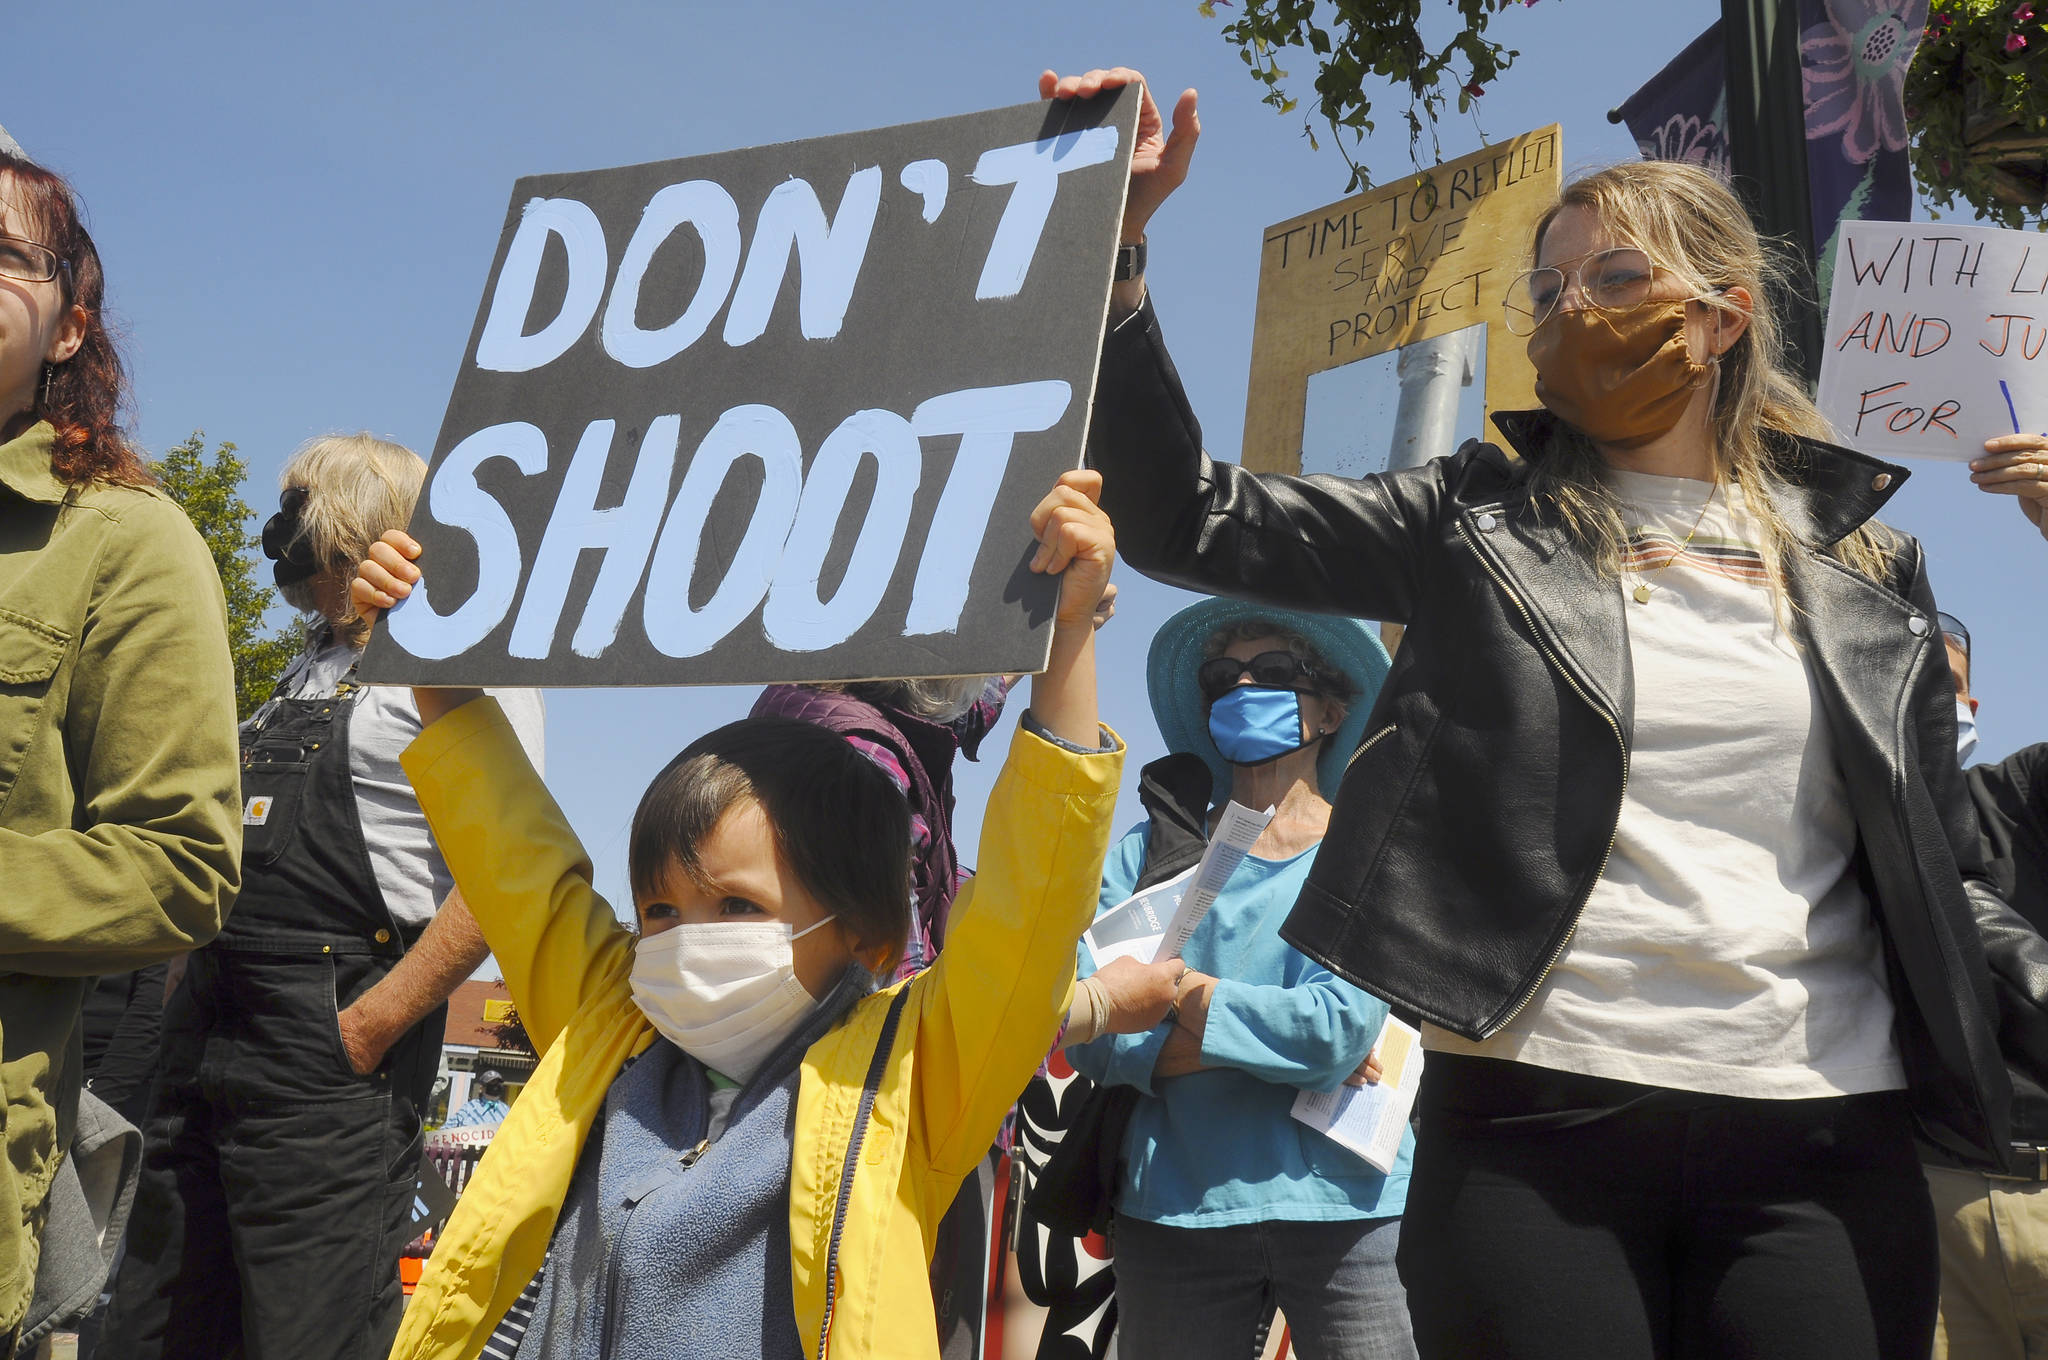 S. Beckett Thomas, 5, holds a “Don’t shoot” sign with mom Courtney Thomas looking on. Courtney organized the protest, saying, “I’m scared for the world, for my son. This (protest) is the least I can do.” Sequim Gazette photo by Michael Dashiell